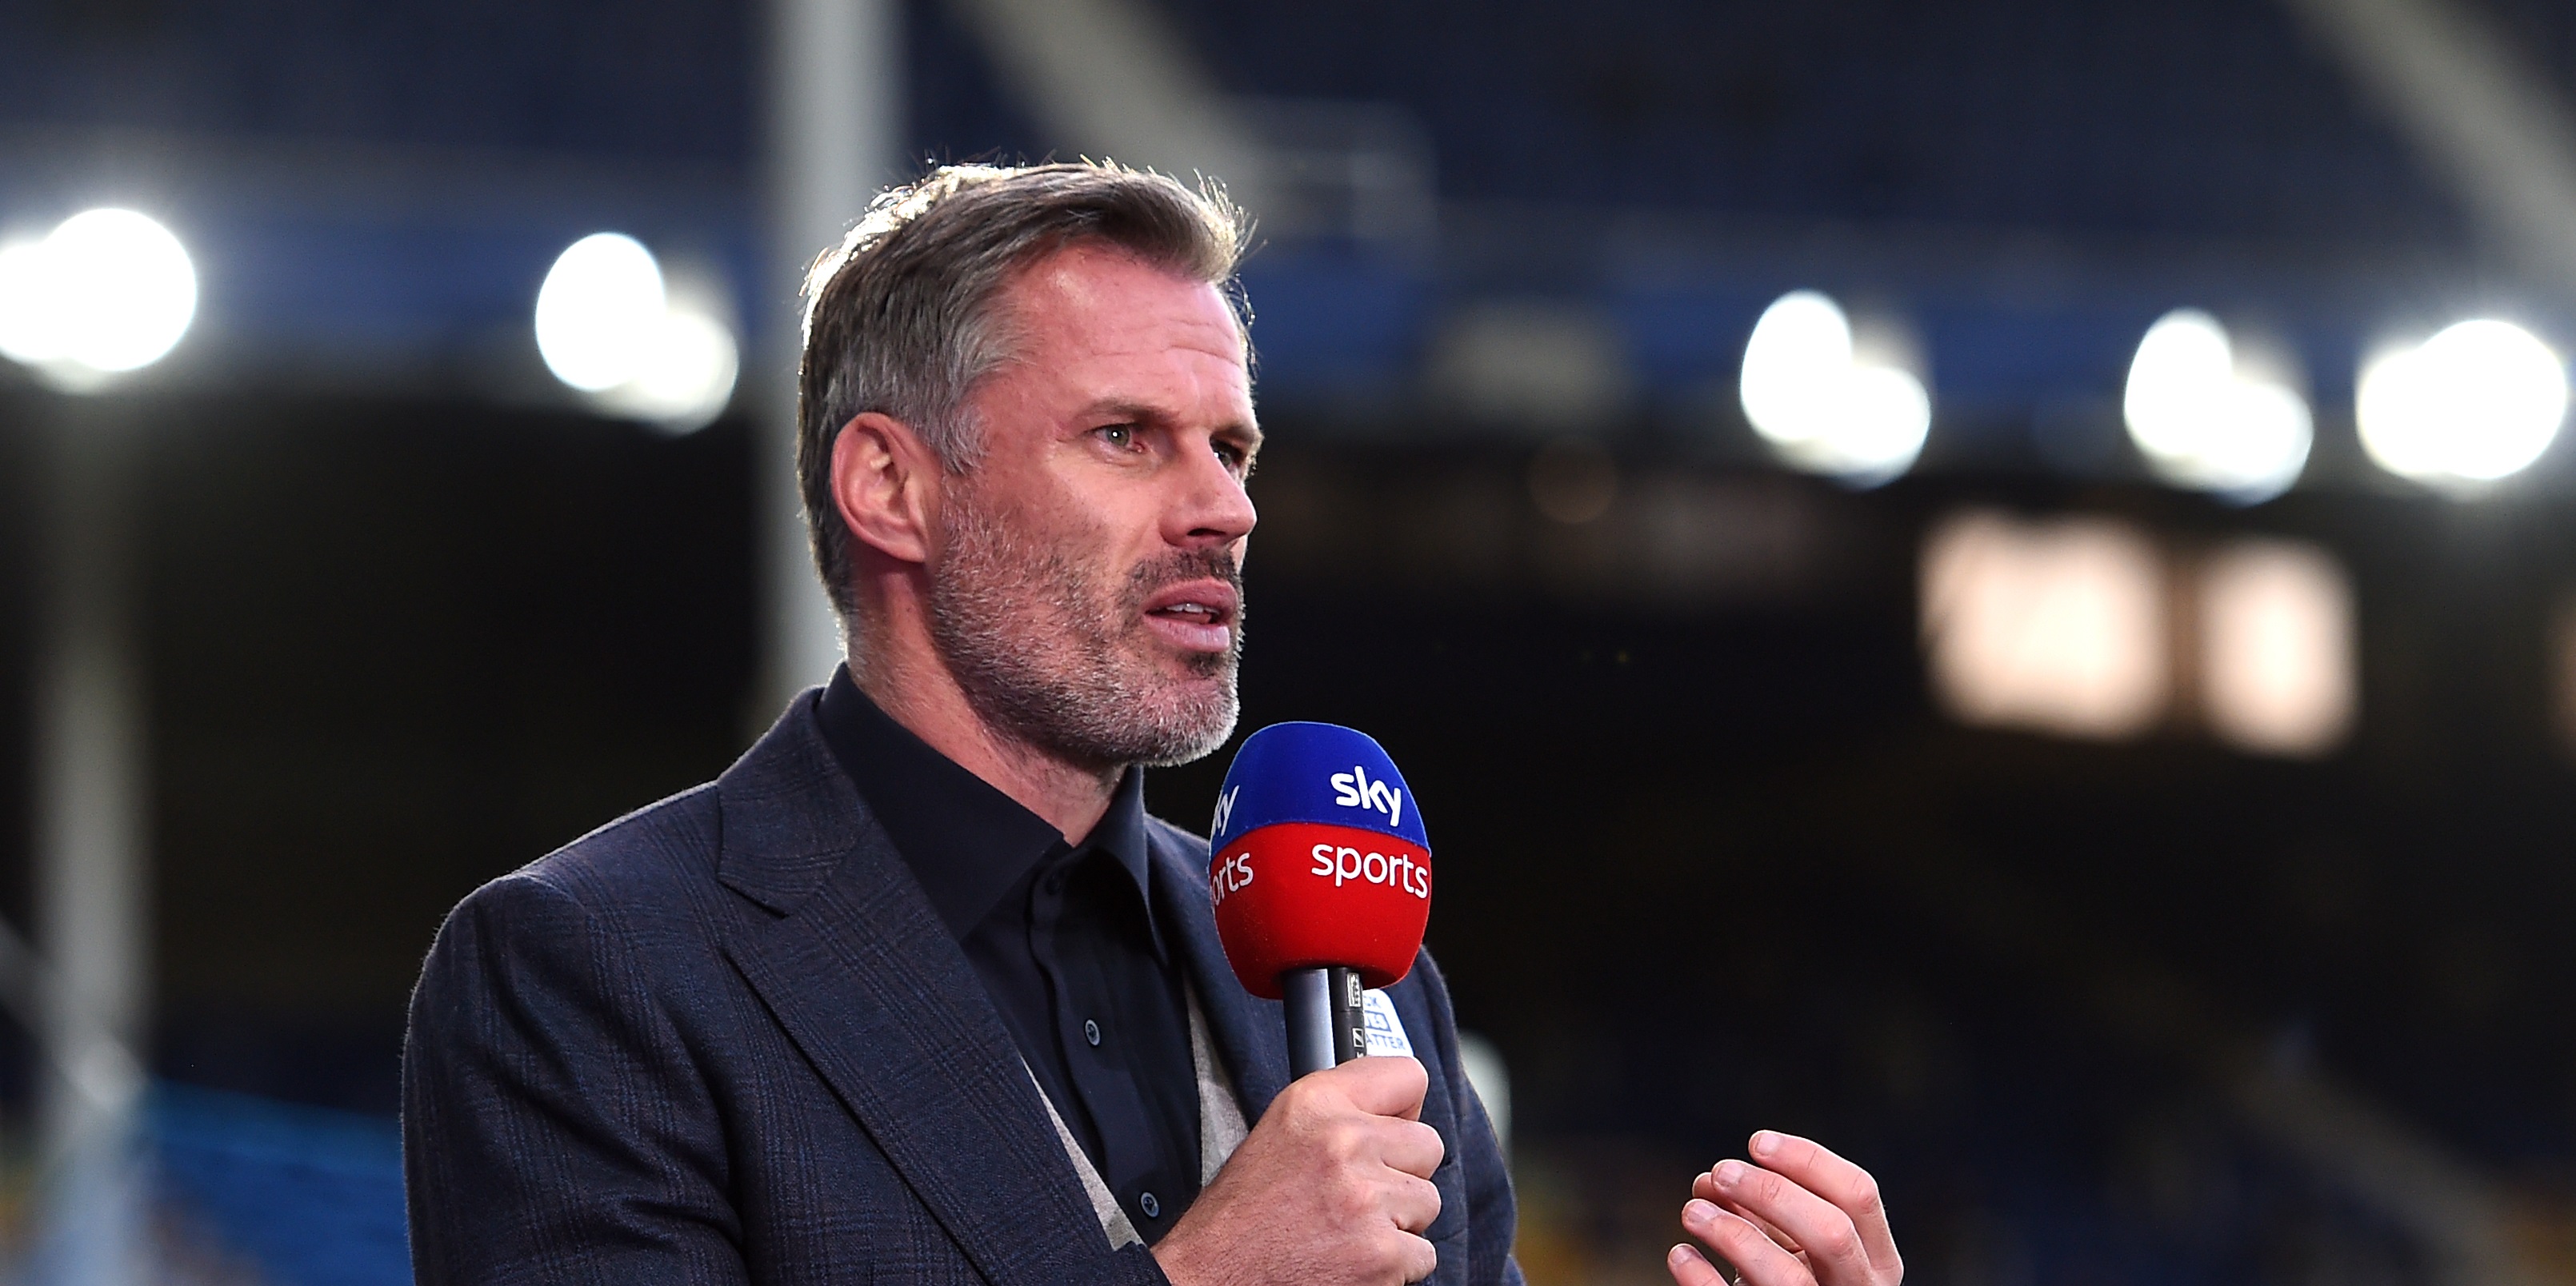 Jamie Carragher shuts down Manchester United fan with brilliant reply on Twitter